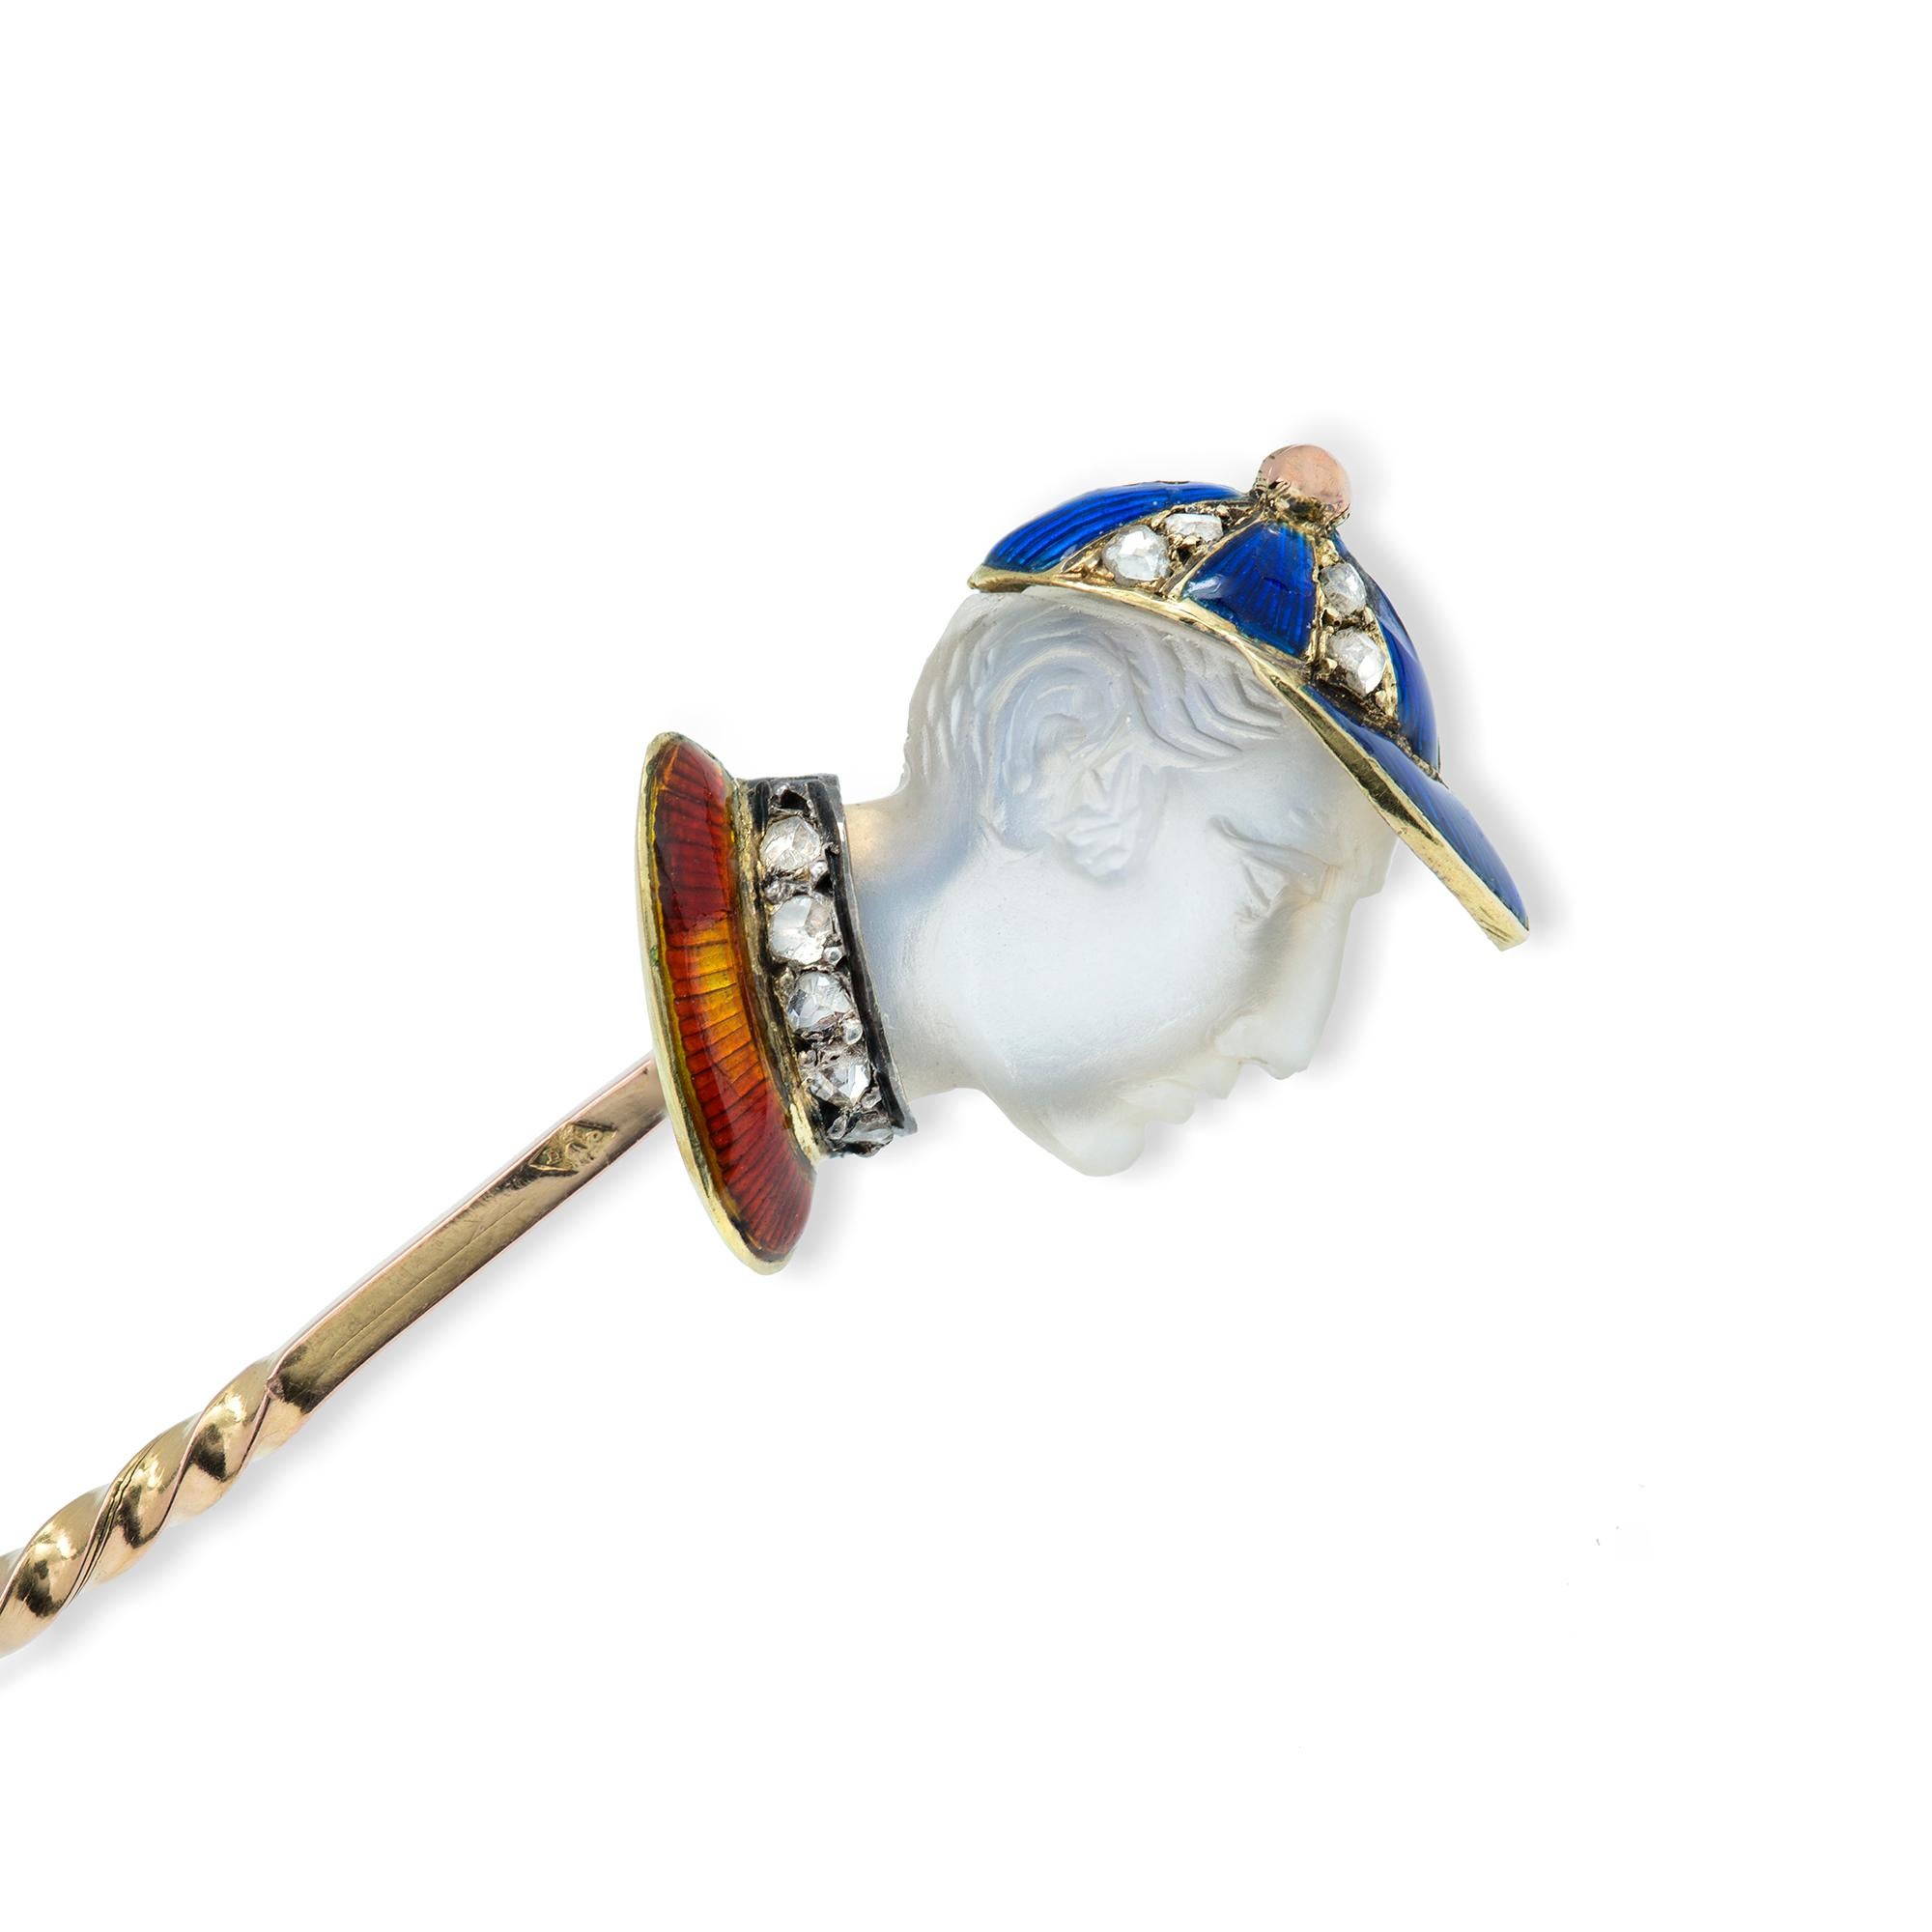 A jockey moonstone cameo stick-pin, the realistically carved moonstone in the form a jockey's head, with a blue enameled and rose-cut diamond-set cap, to a rose-cut diamond-set and red- enameled collar, all mount in yellow gold, with yellow gold pin